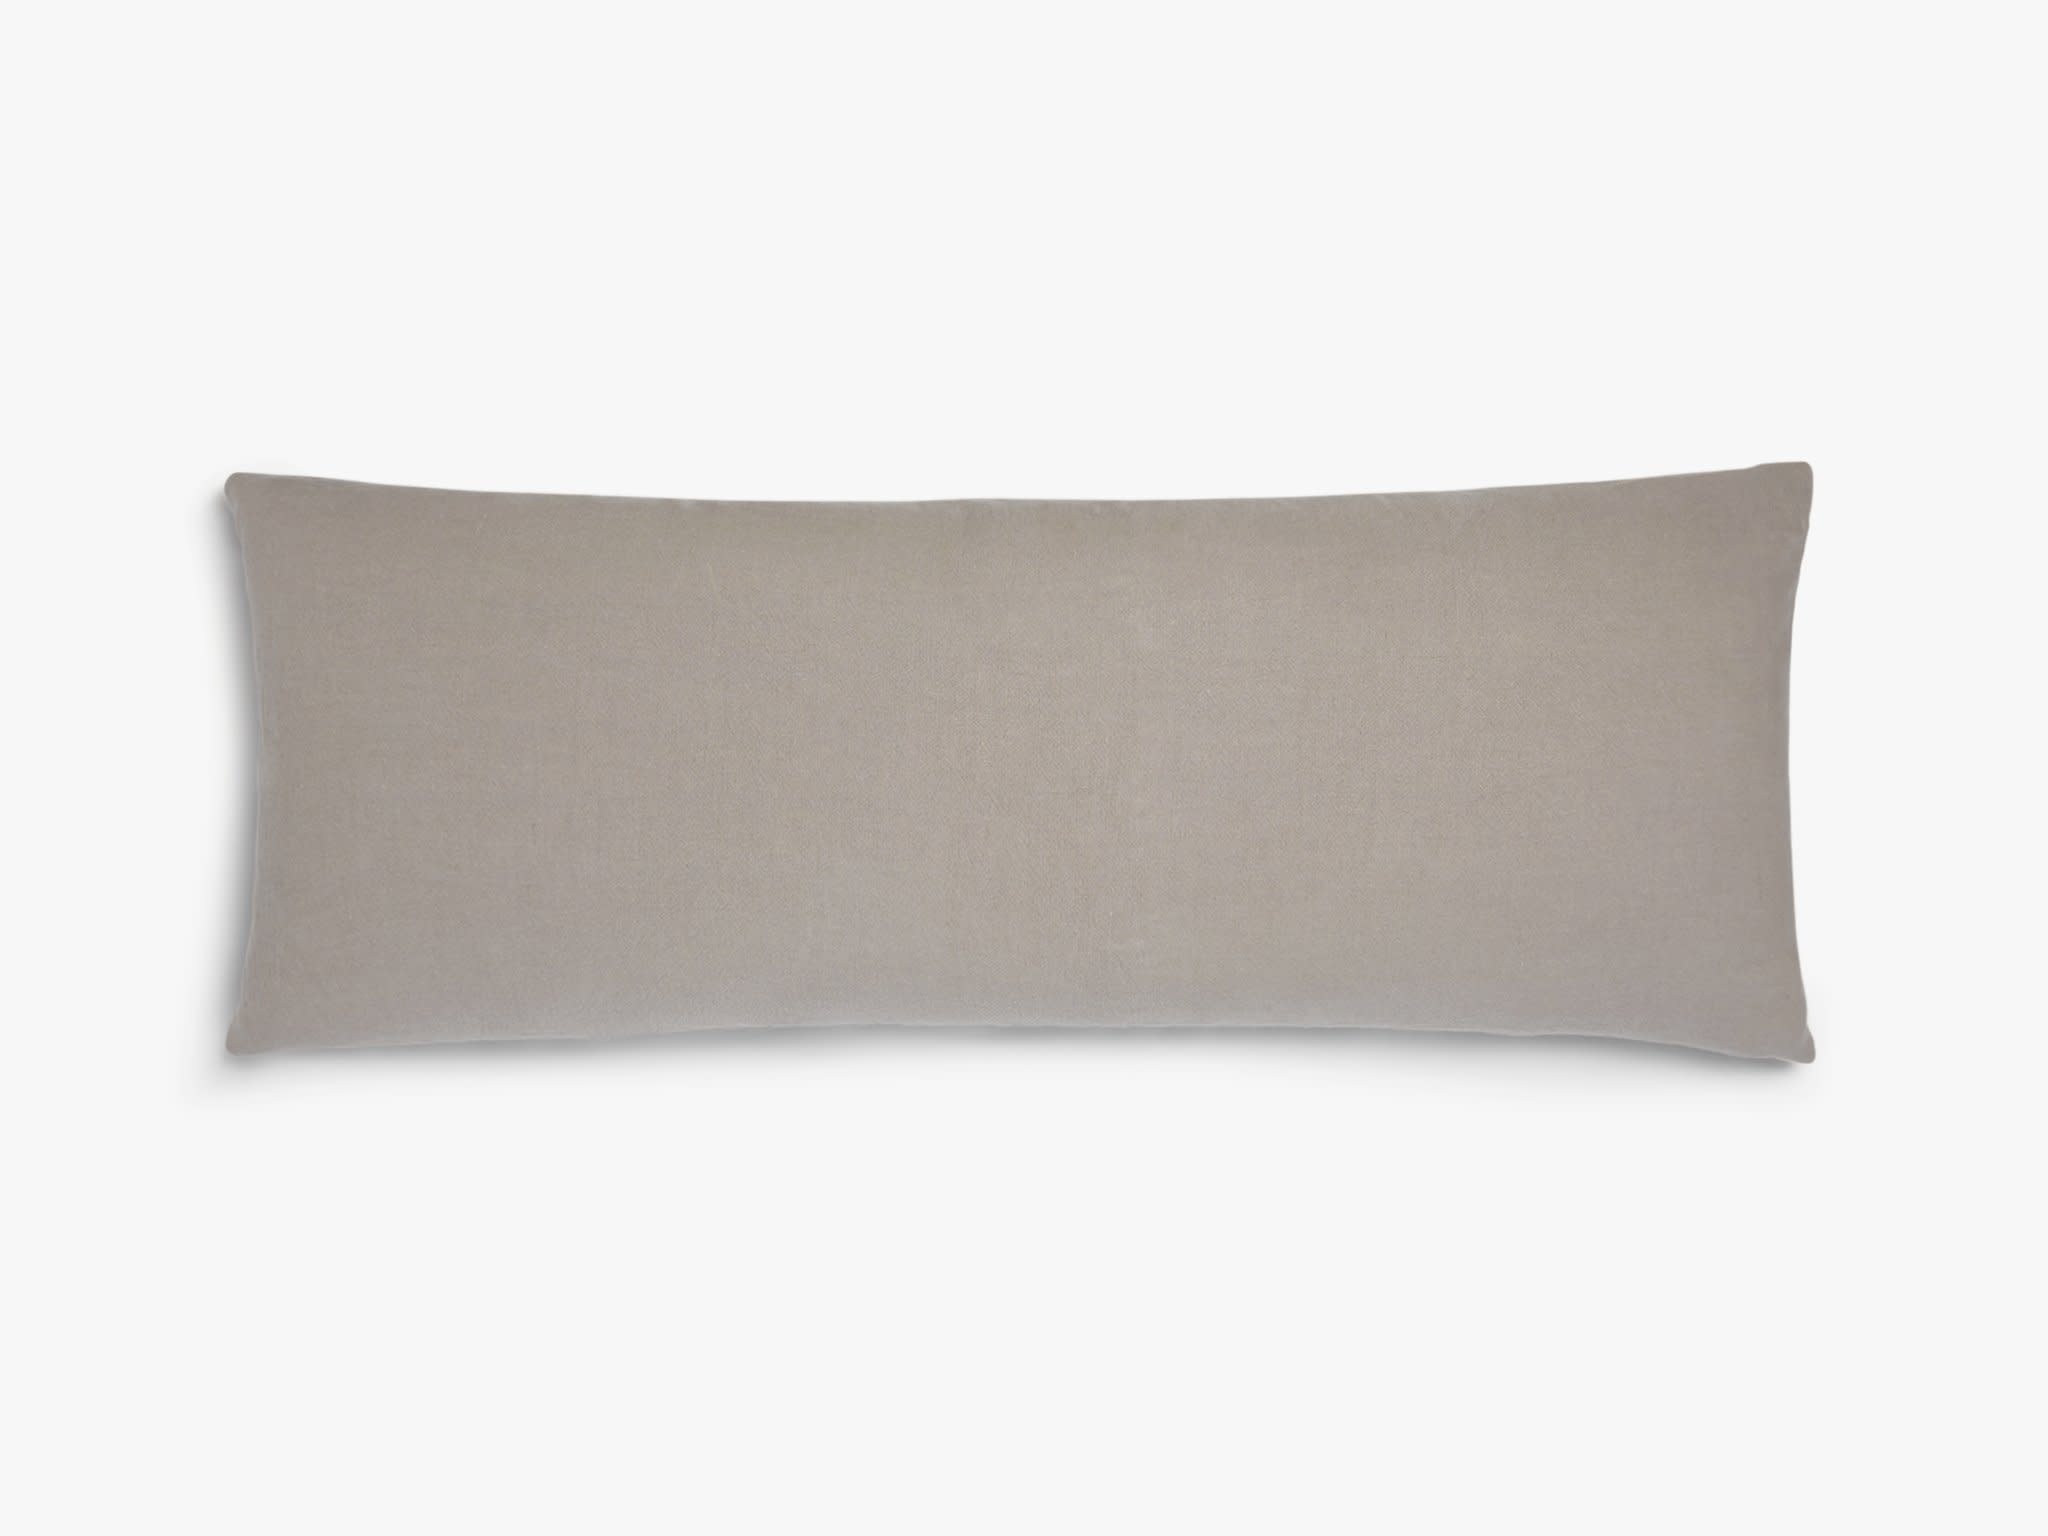 Shop Vintage Linen Body Pillow Cover from Parachute on Openhaus